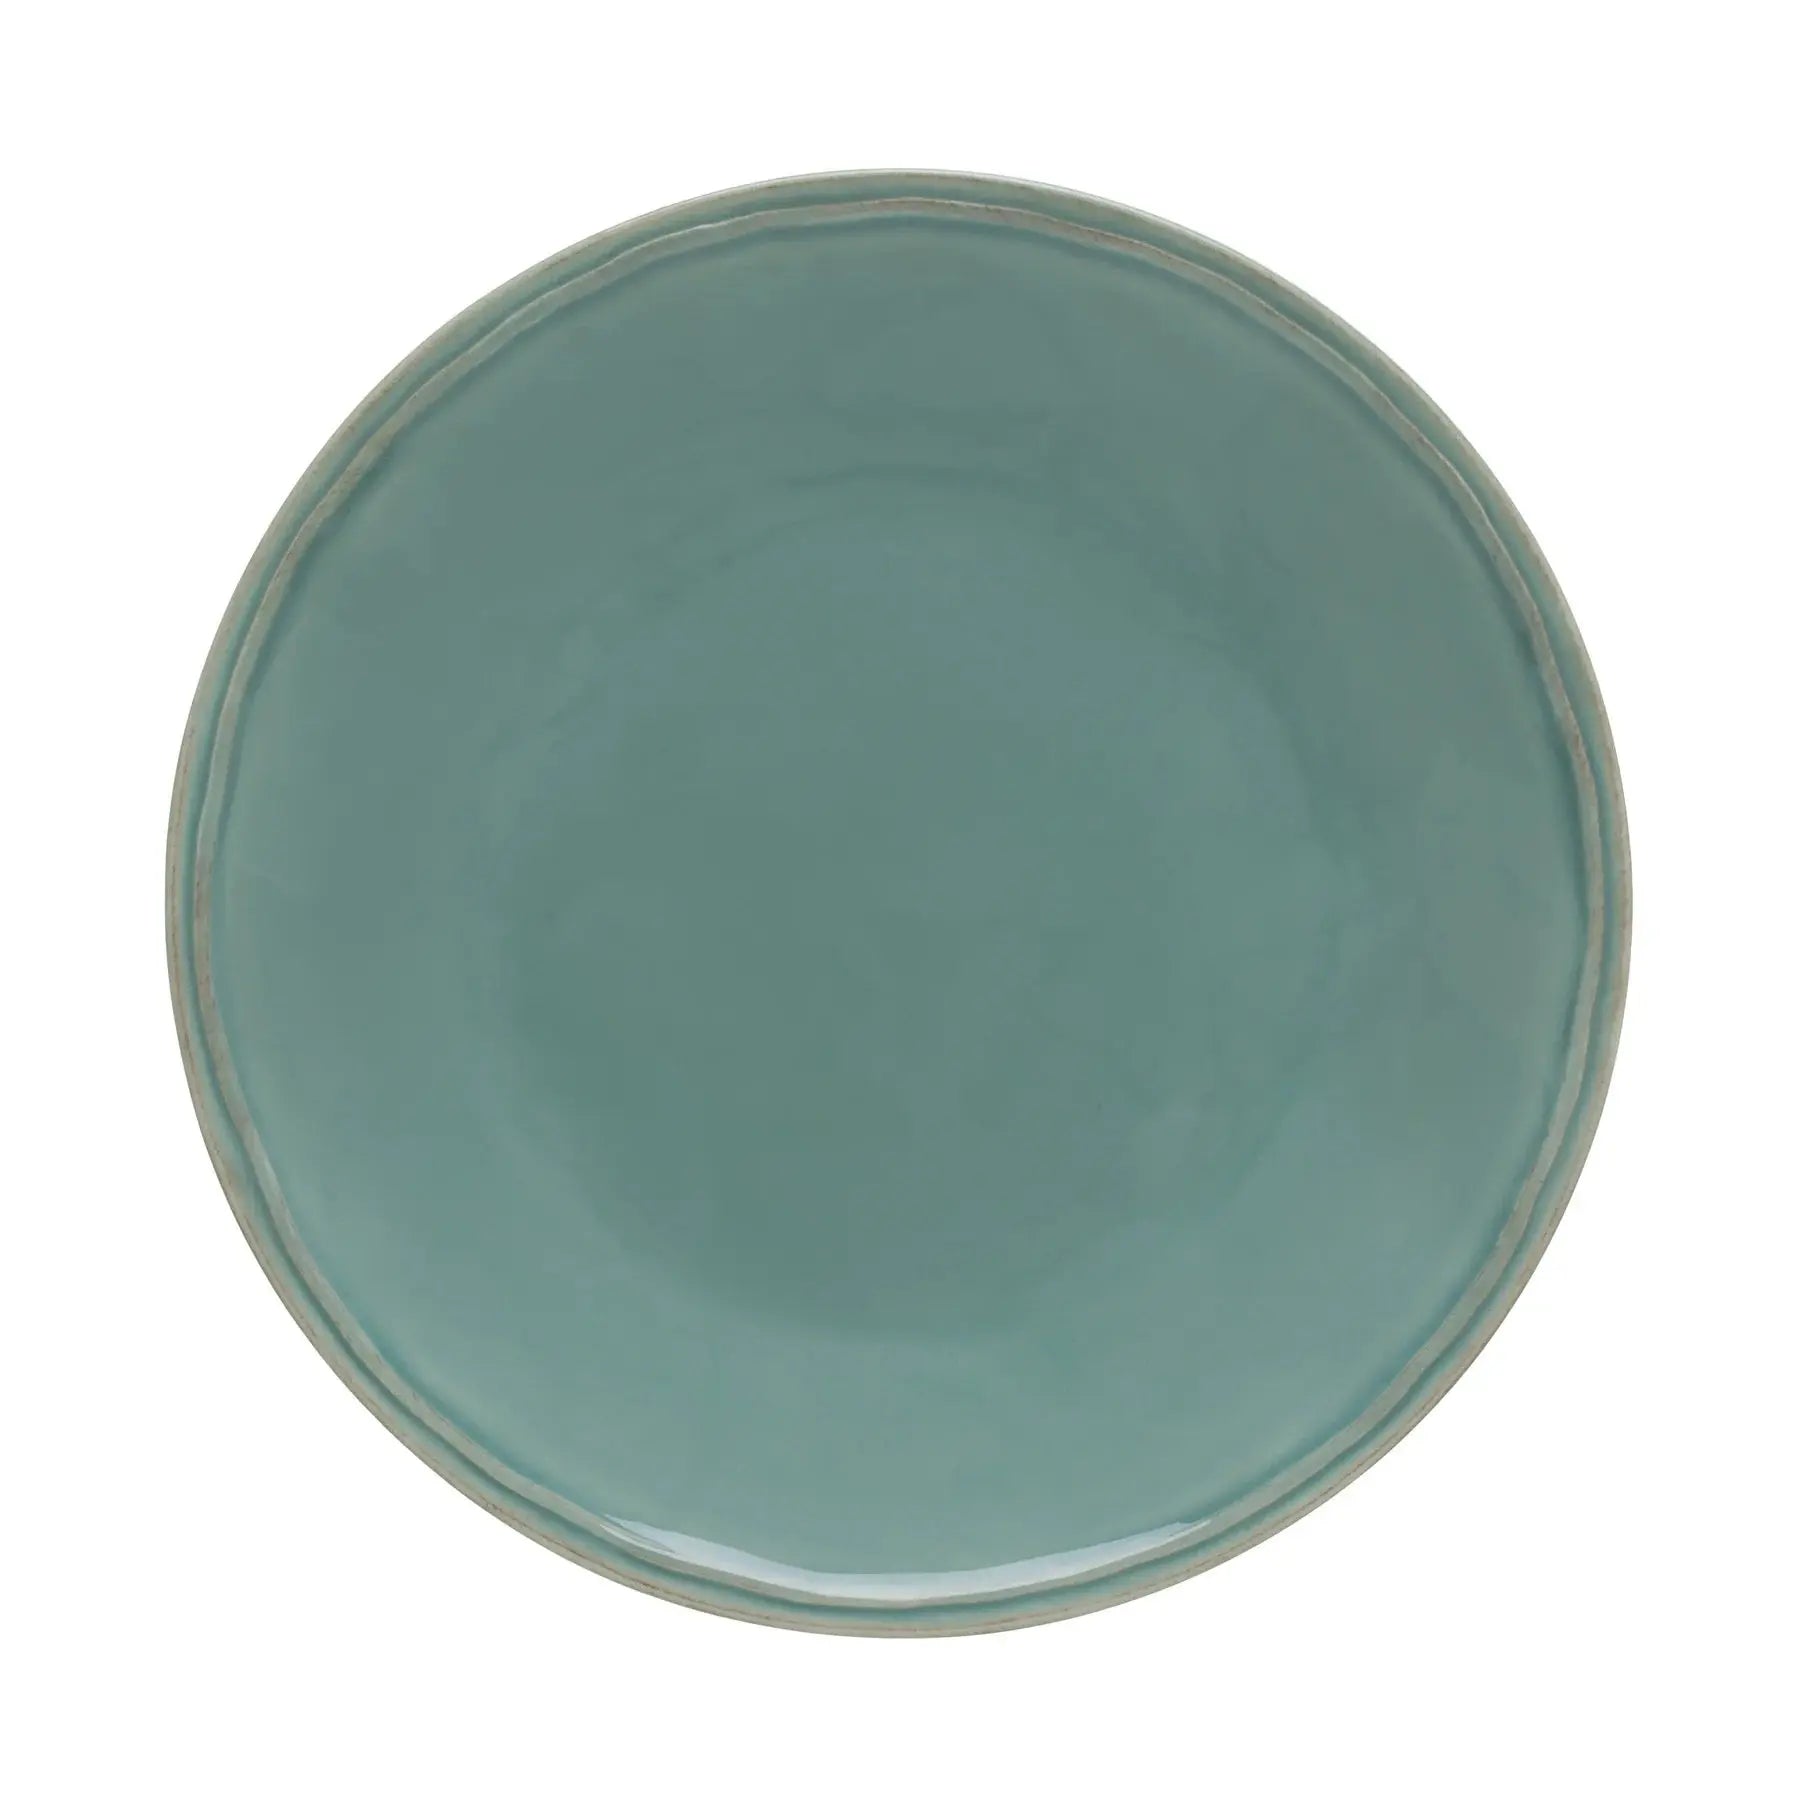 Casafina Fontana Dinner Plate in Turquoise